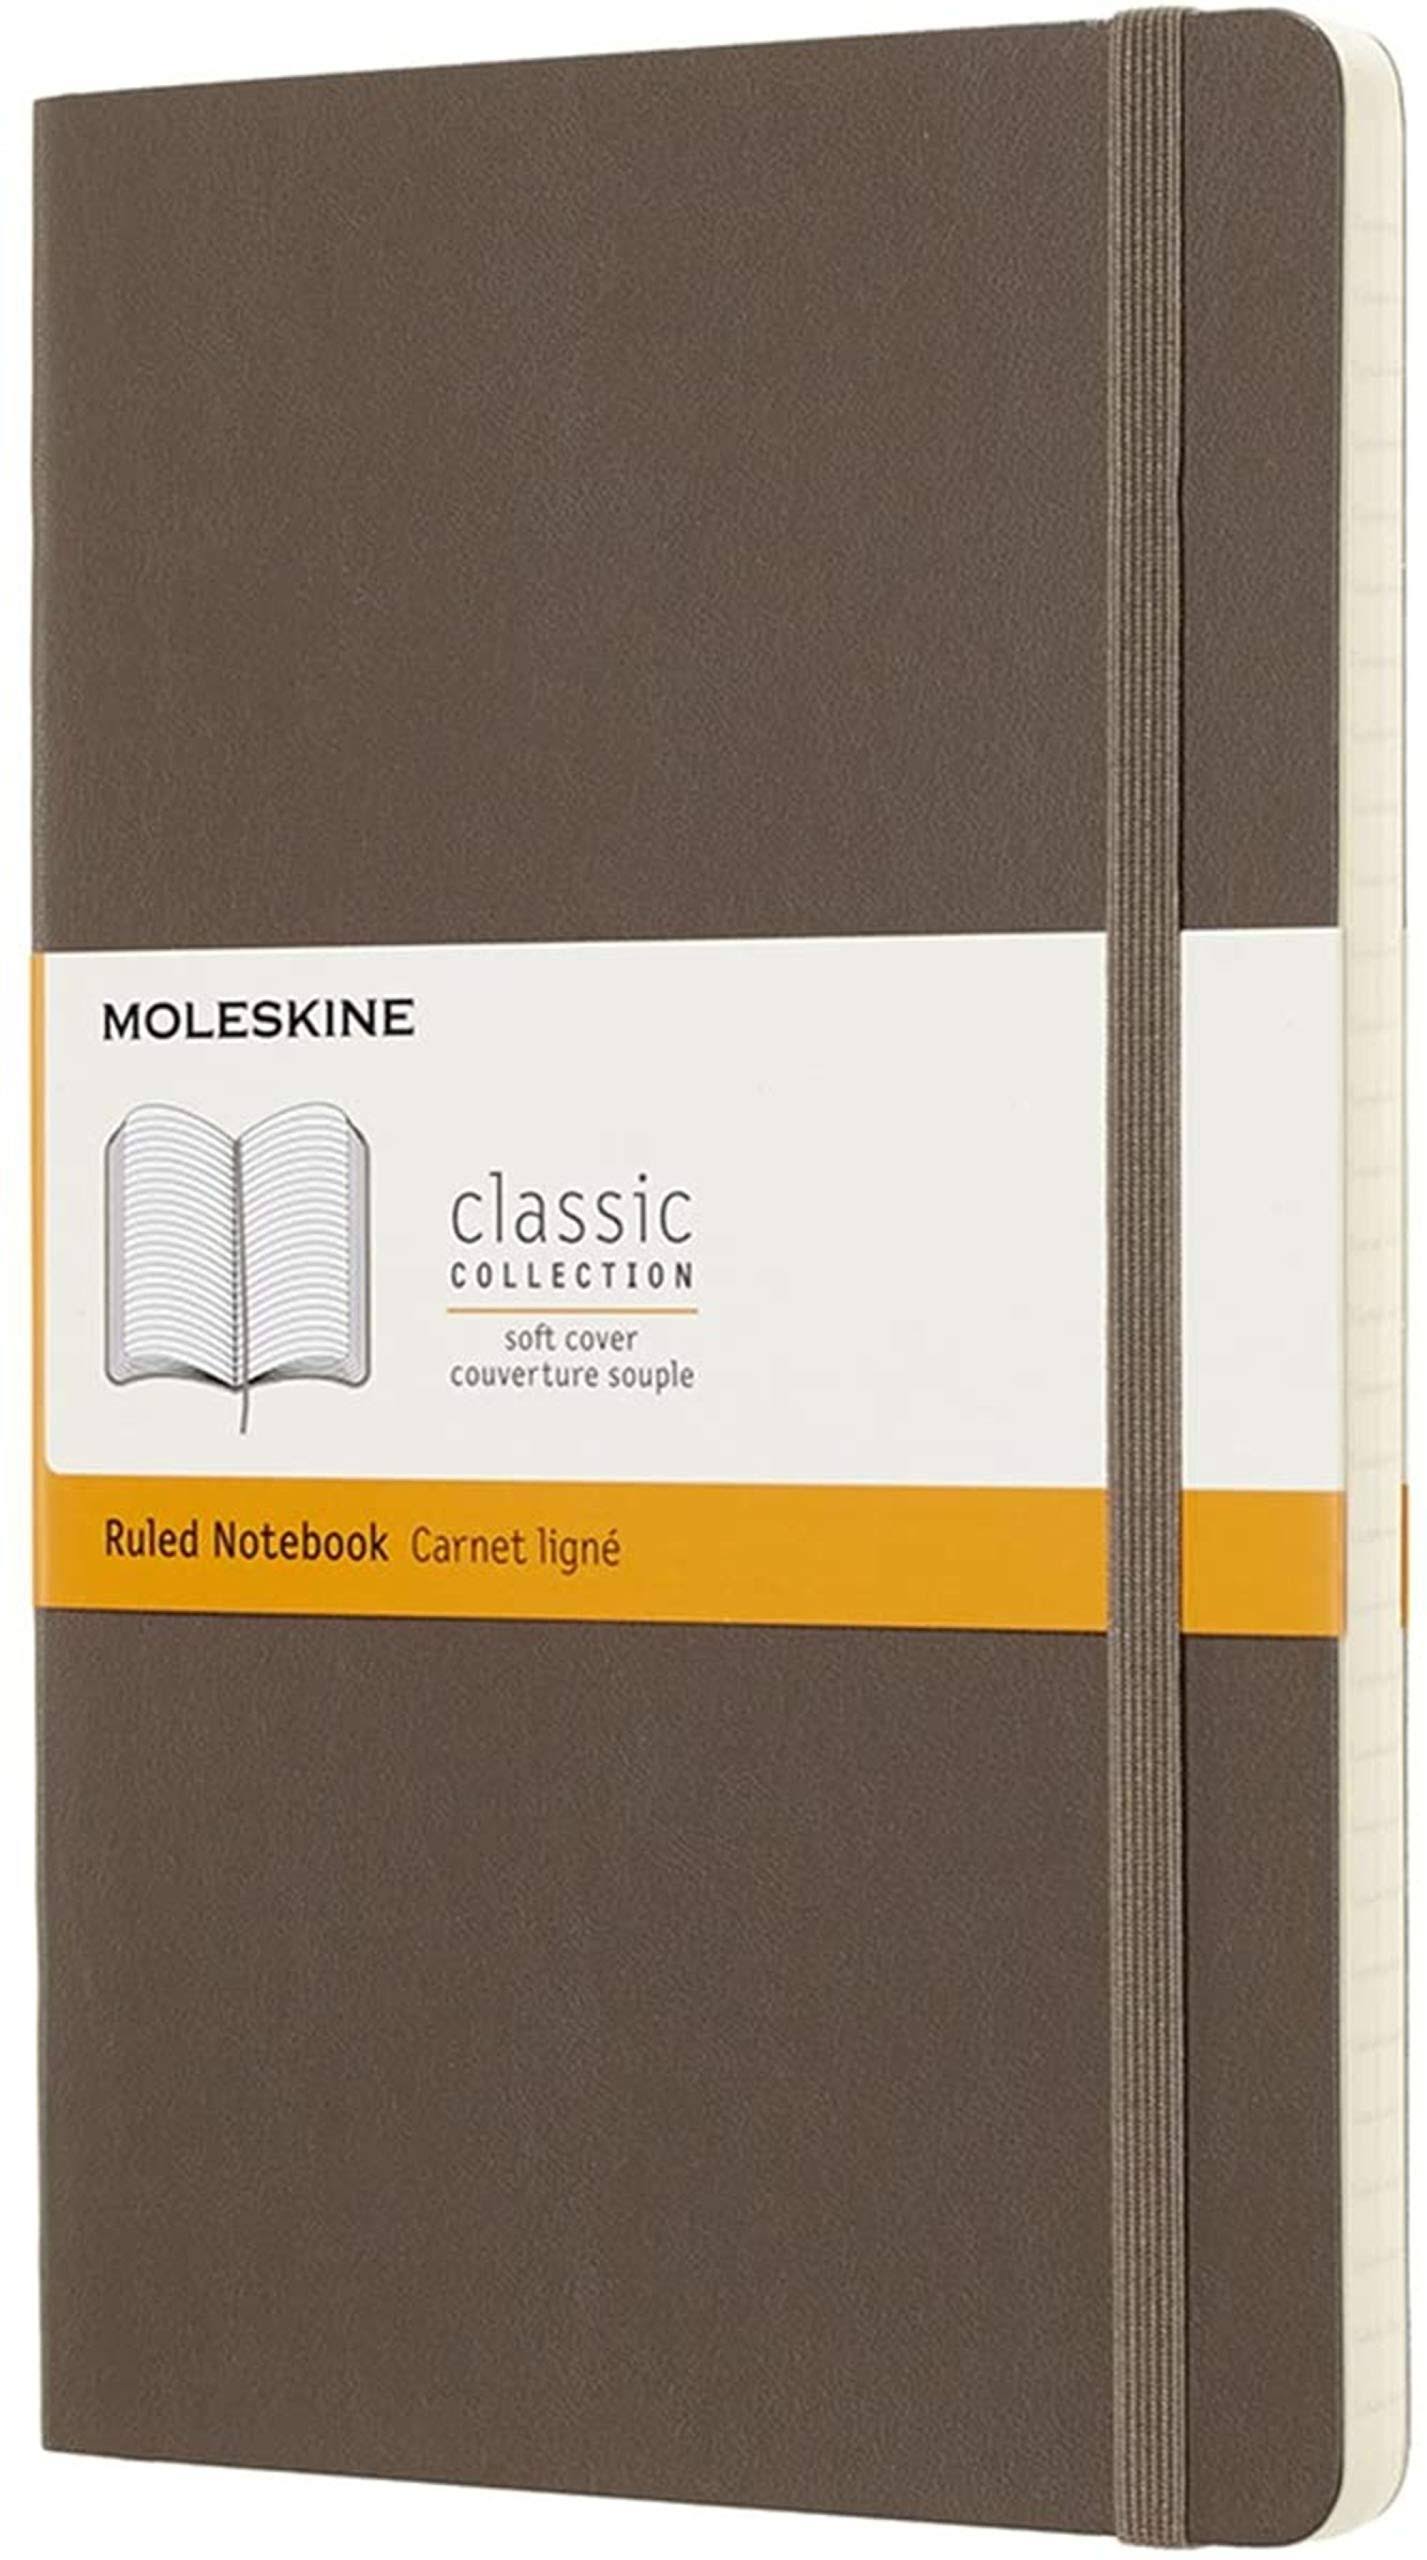 MOLESKINE CLASSIC SOFT COVER LARGE RULED NOTEBOOK EARTH BROWN